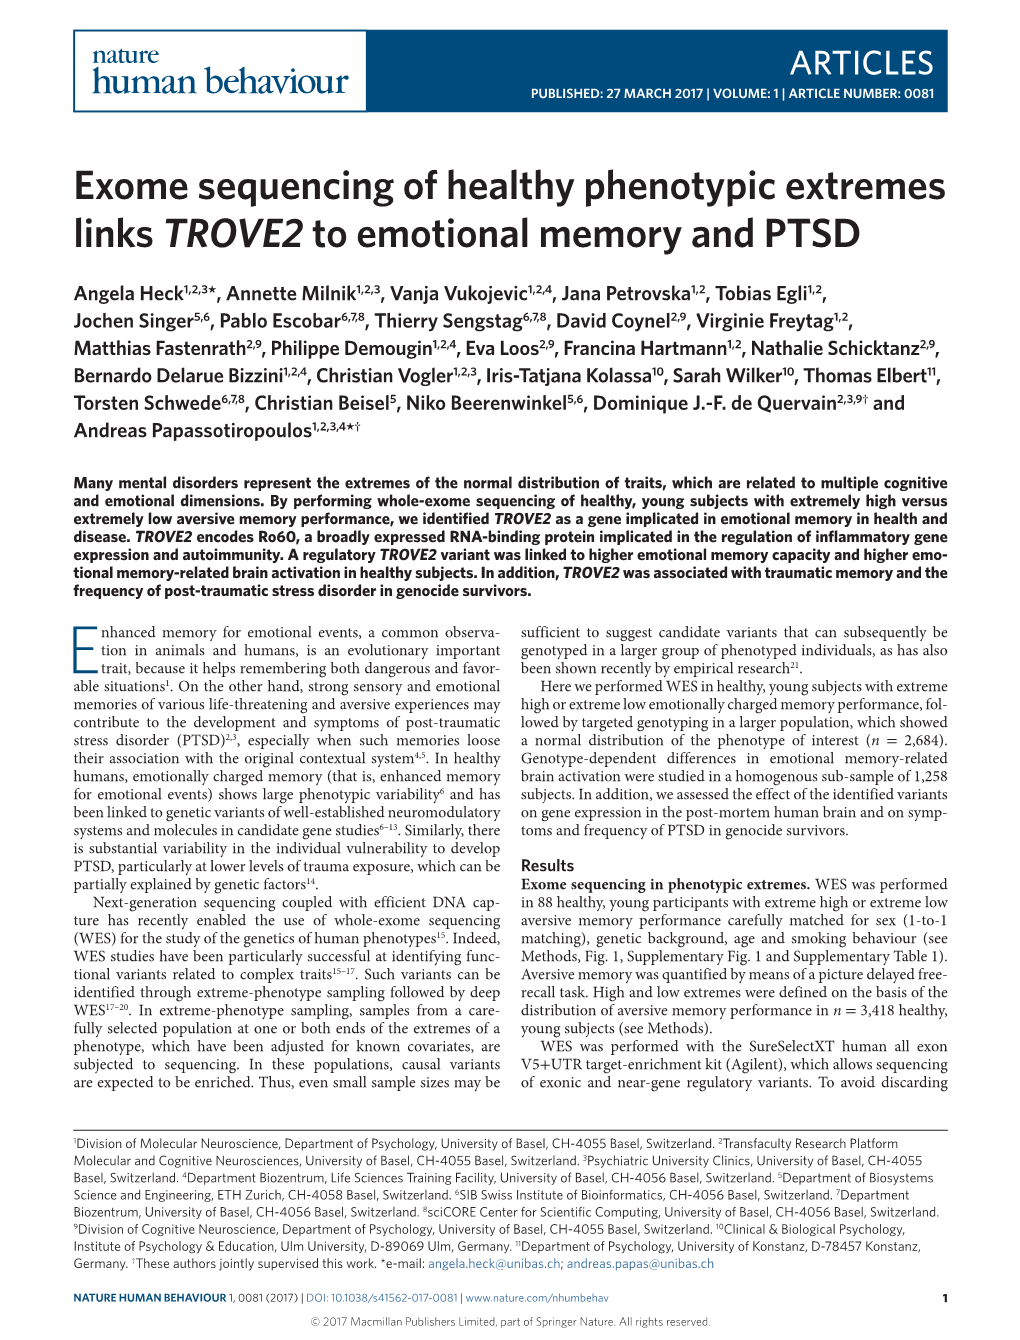 Exome Sequencing of Healthy Phenotypic Extremes Links TROVE2 to Emotional Memory and PTSD